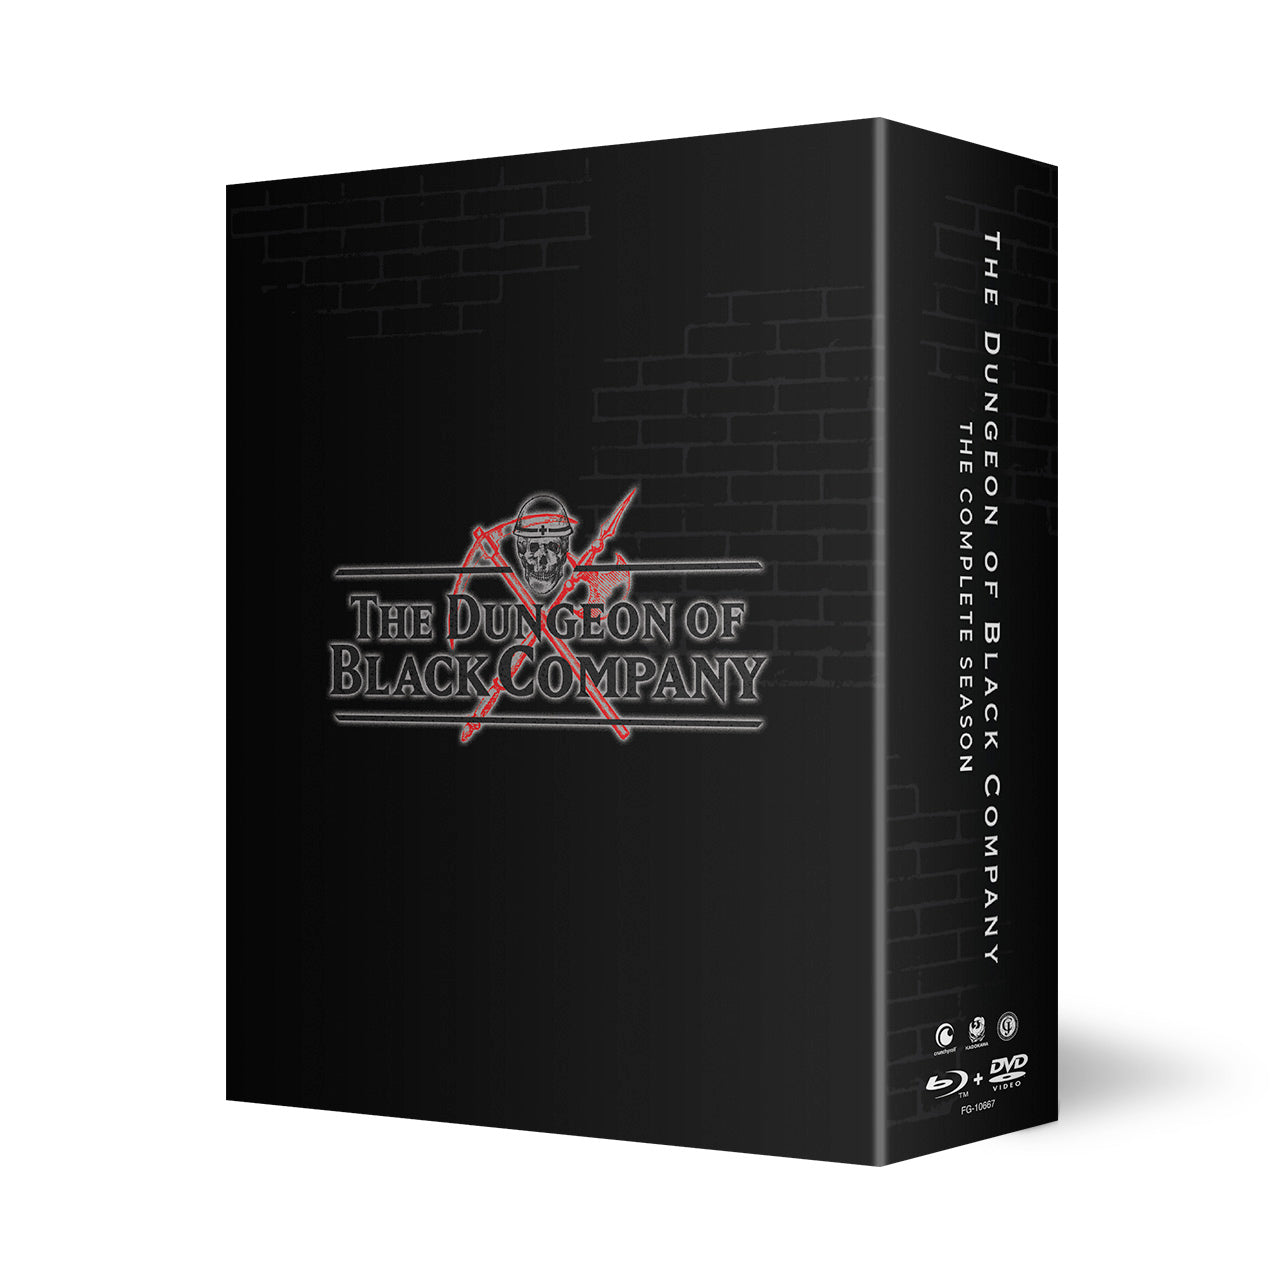 The Dungeon of Black Company - The Complete Season - BD/DVD - LE image count 3